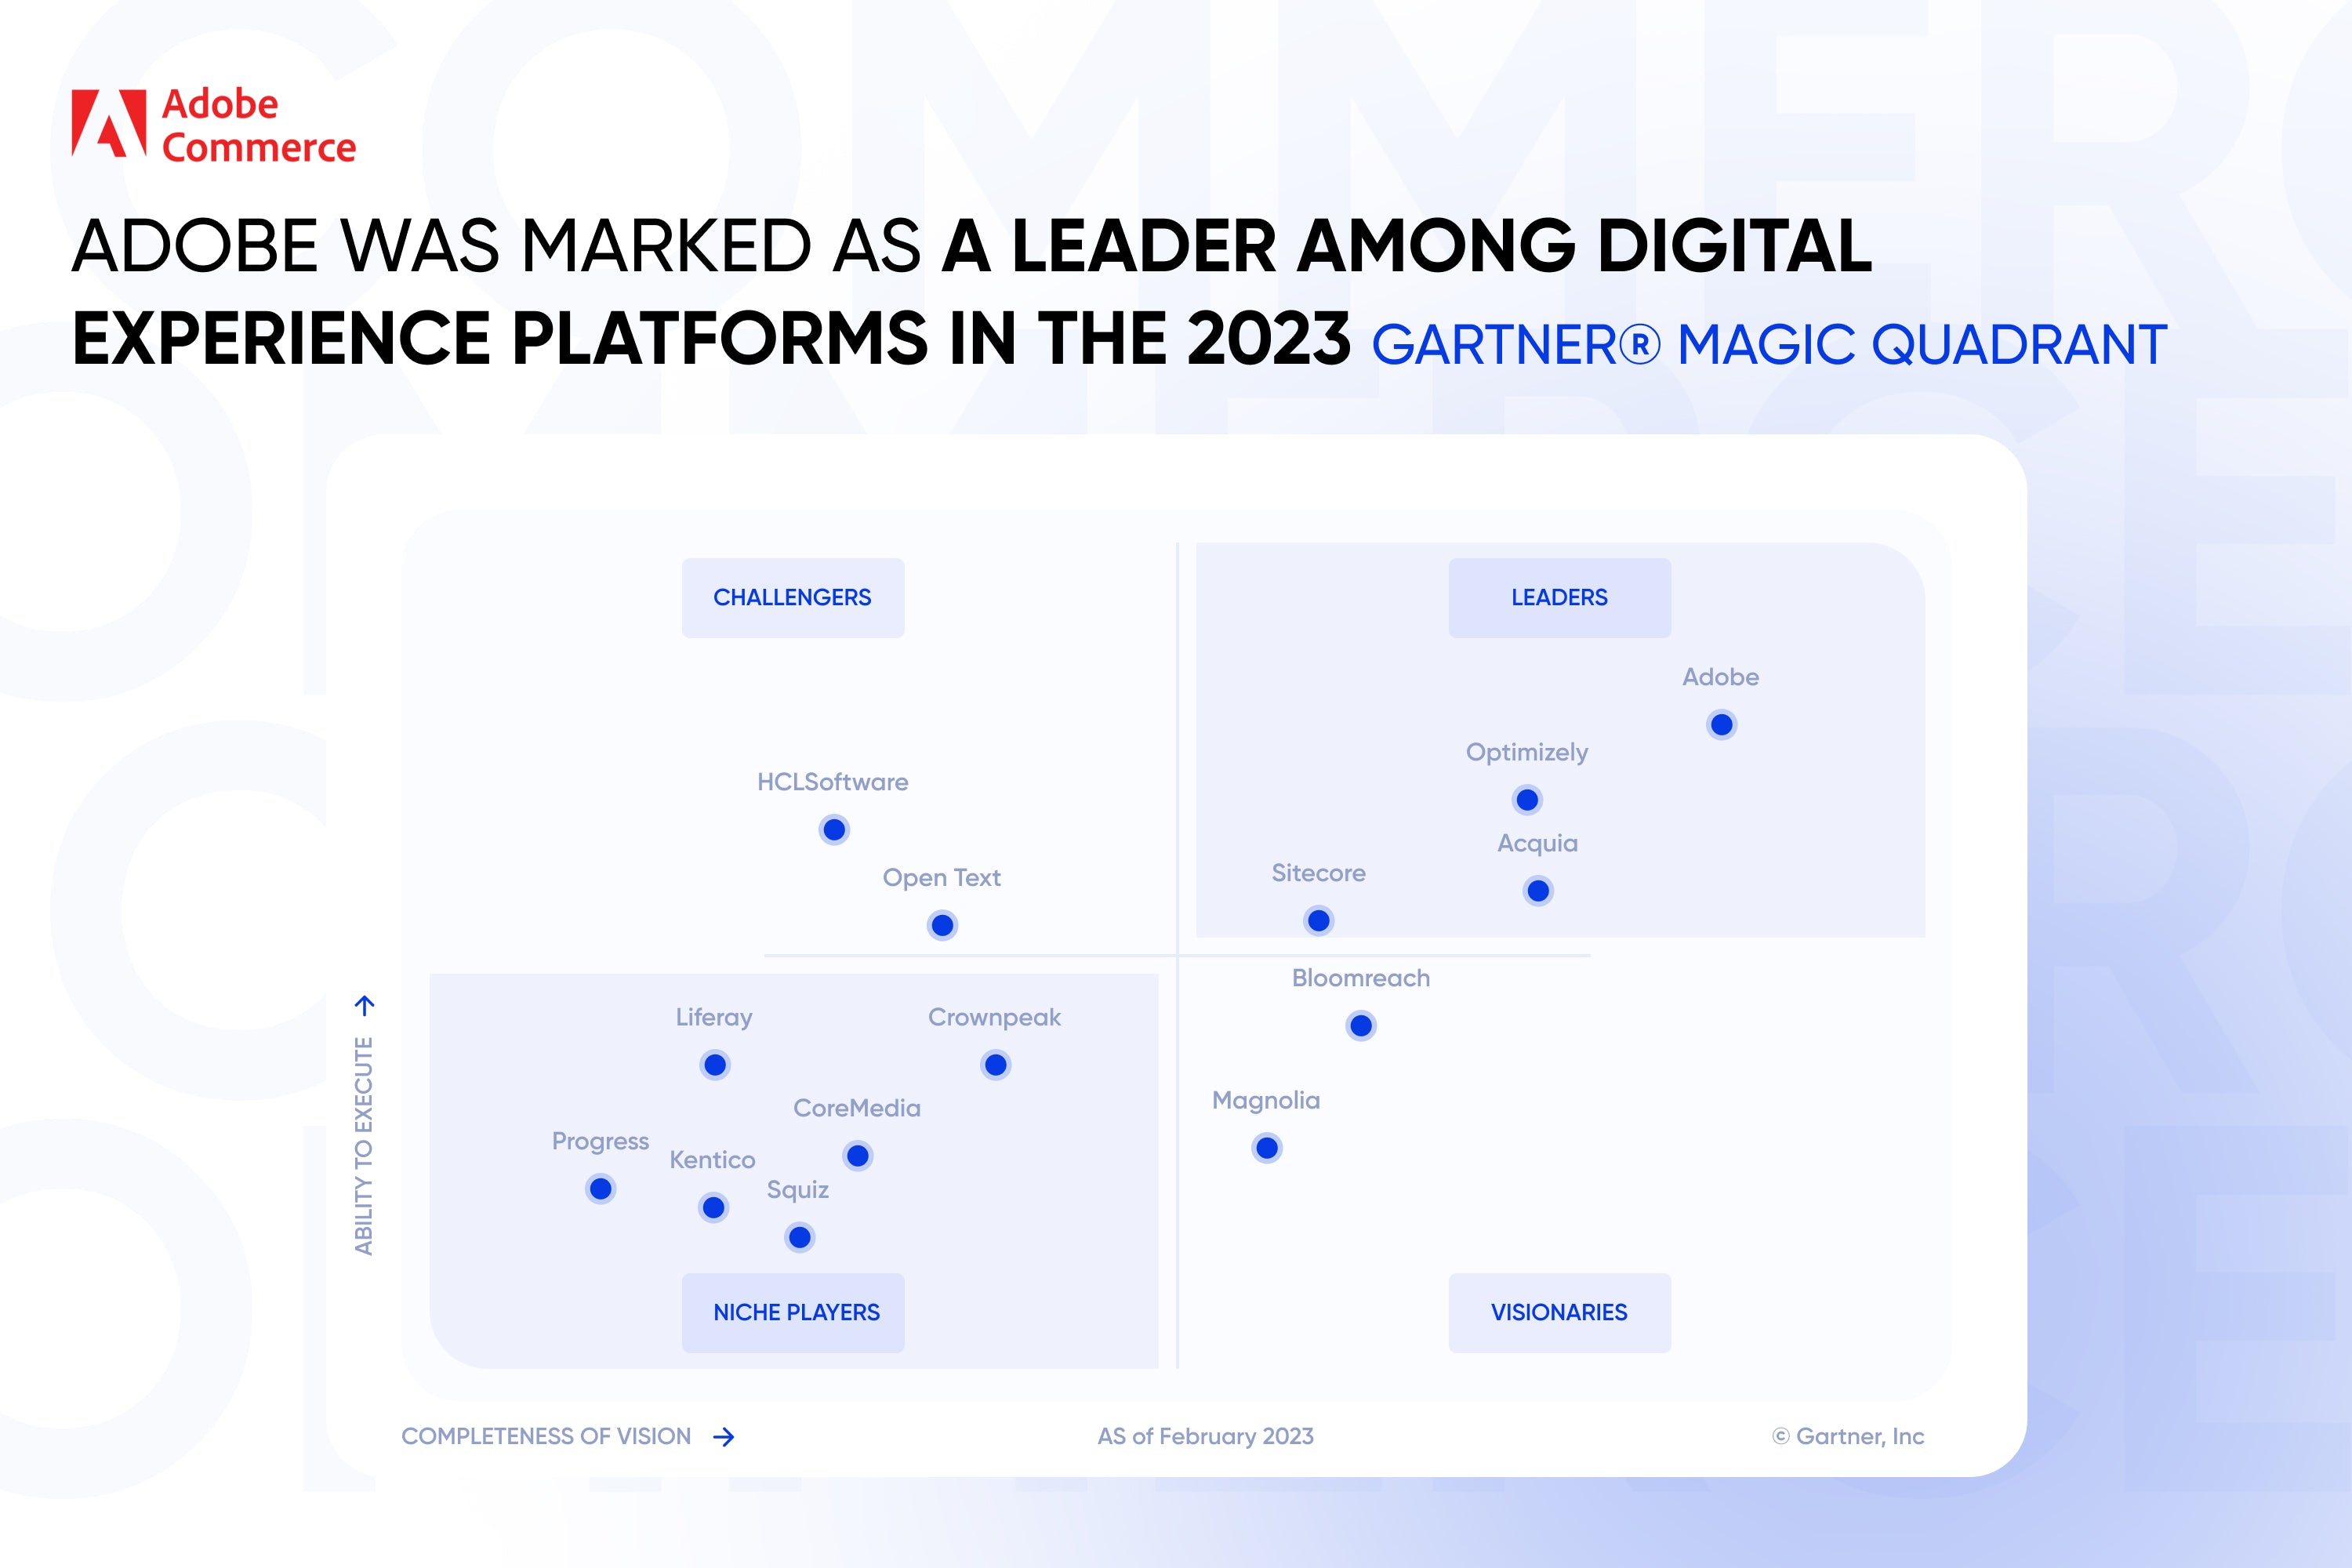 Adobe was marked as a Leader among Digital Experience Platforms in the 2023 Gartner® Magic Quadrant.